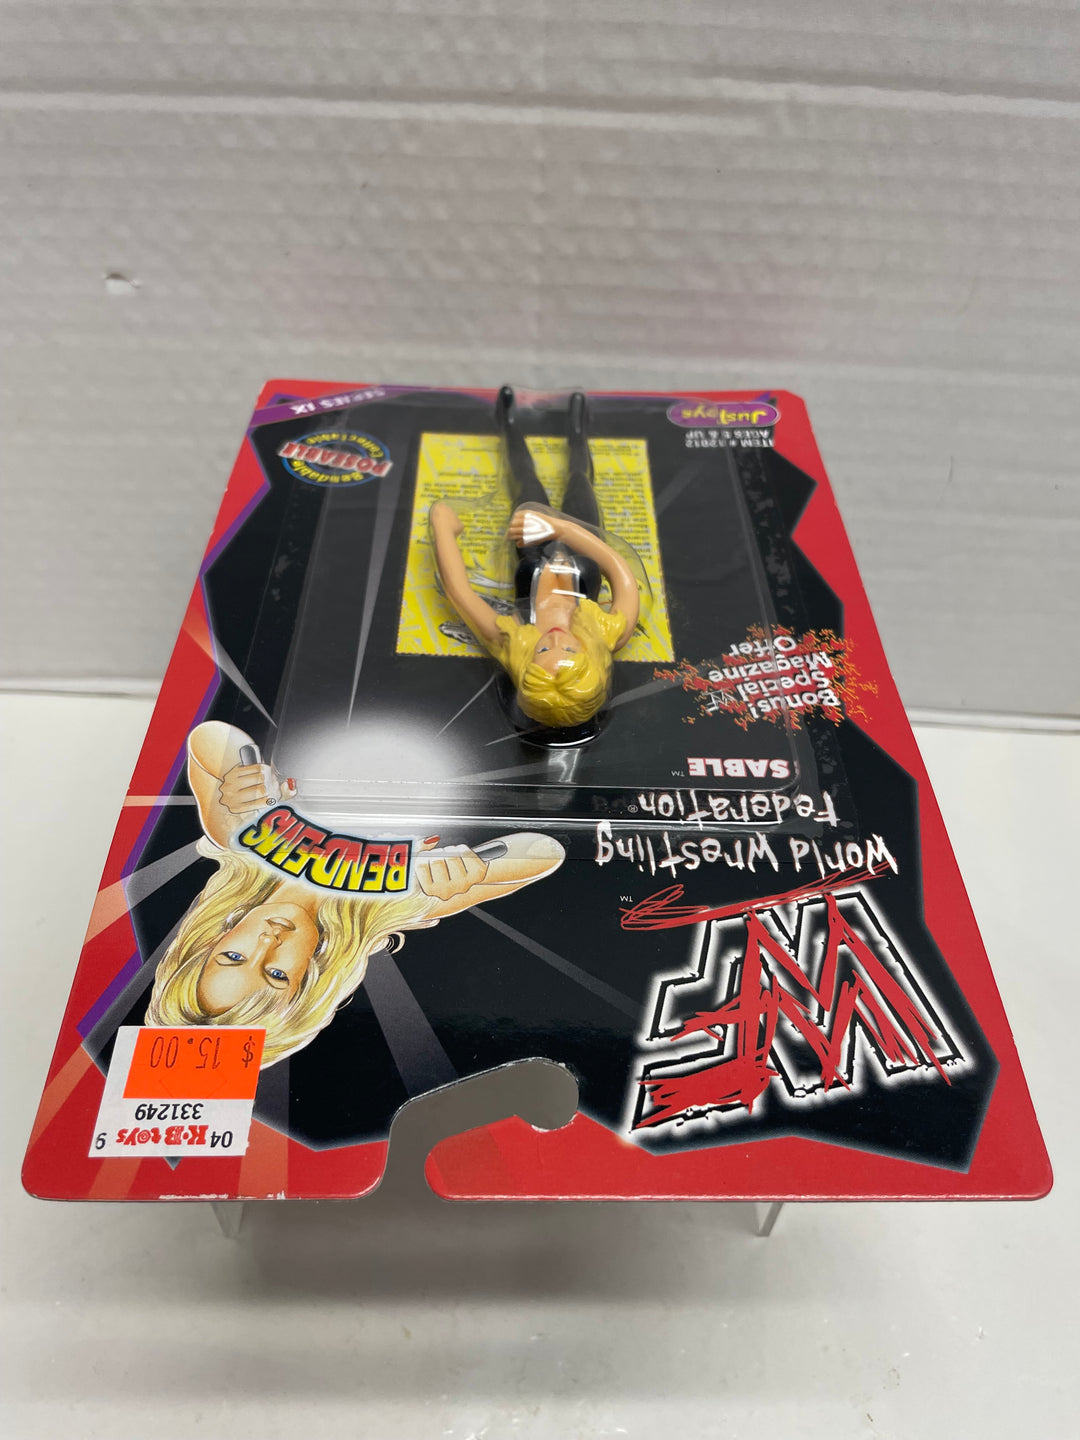 WWF Sable Bend-Ems Poseable Collection Series IX JusToys MOC 1998